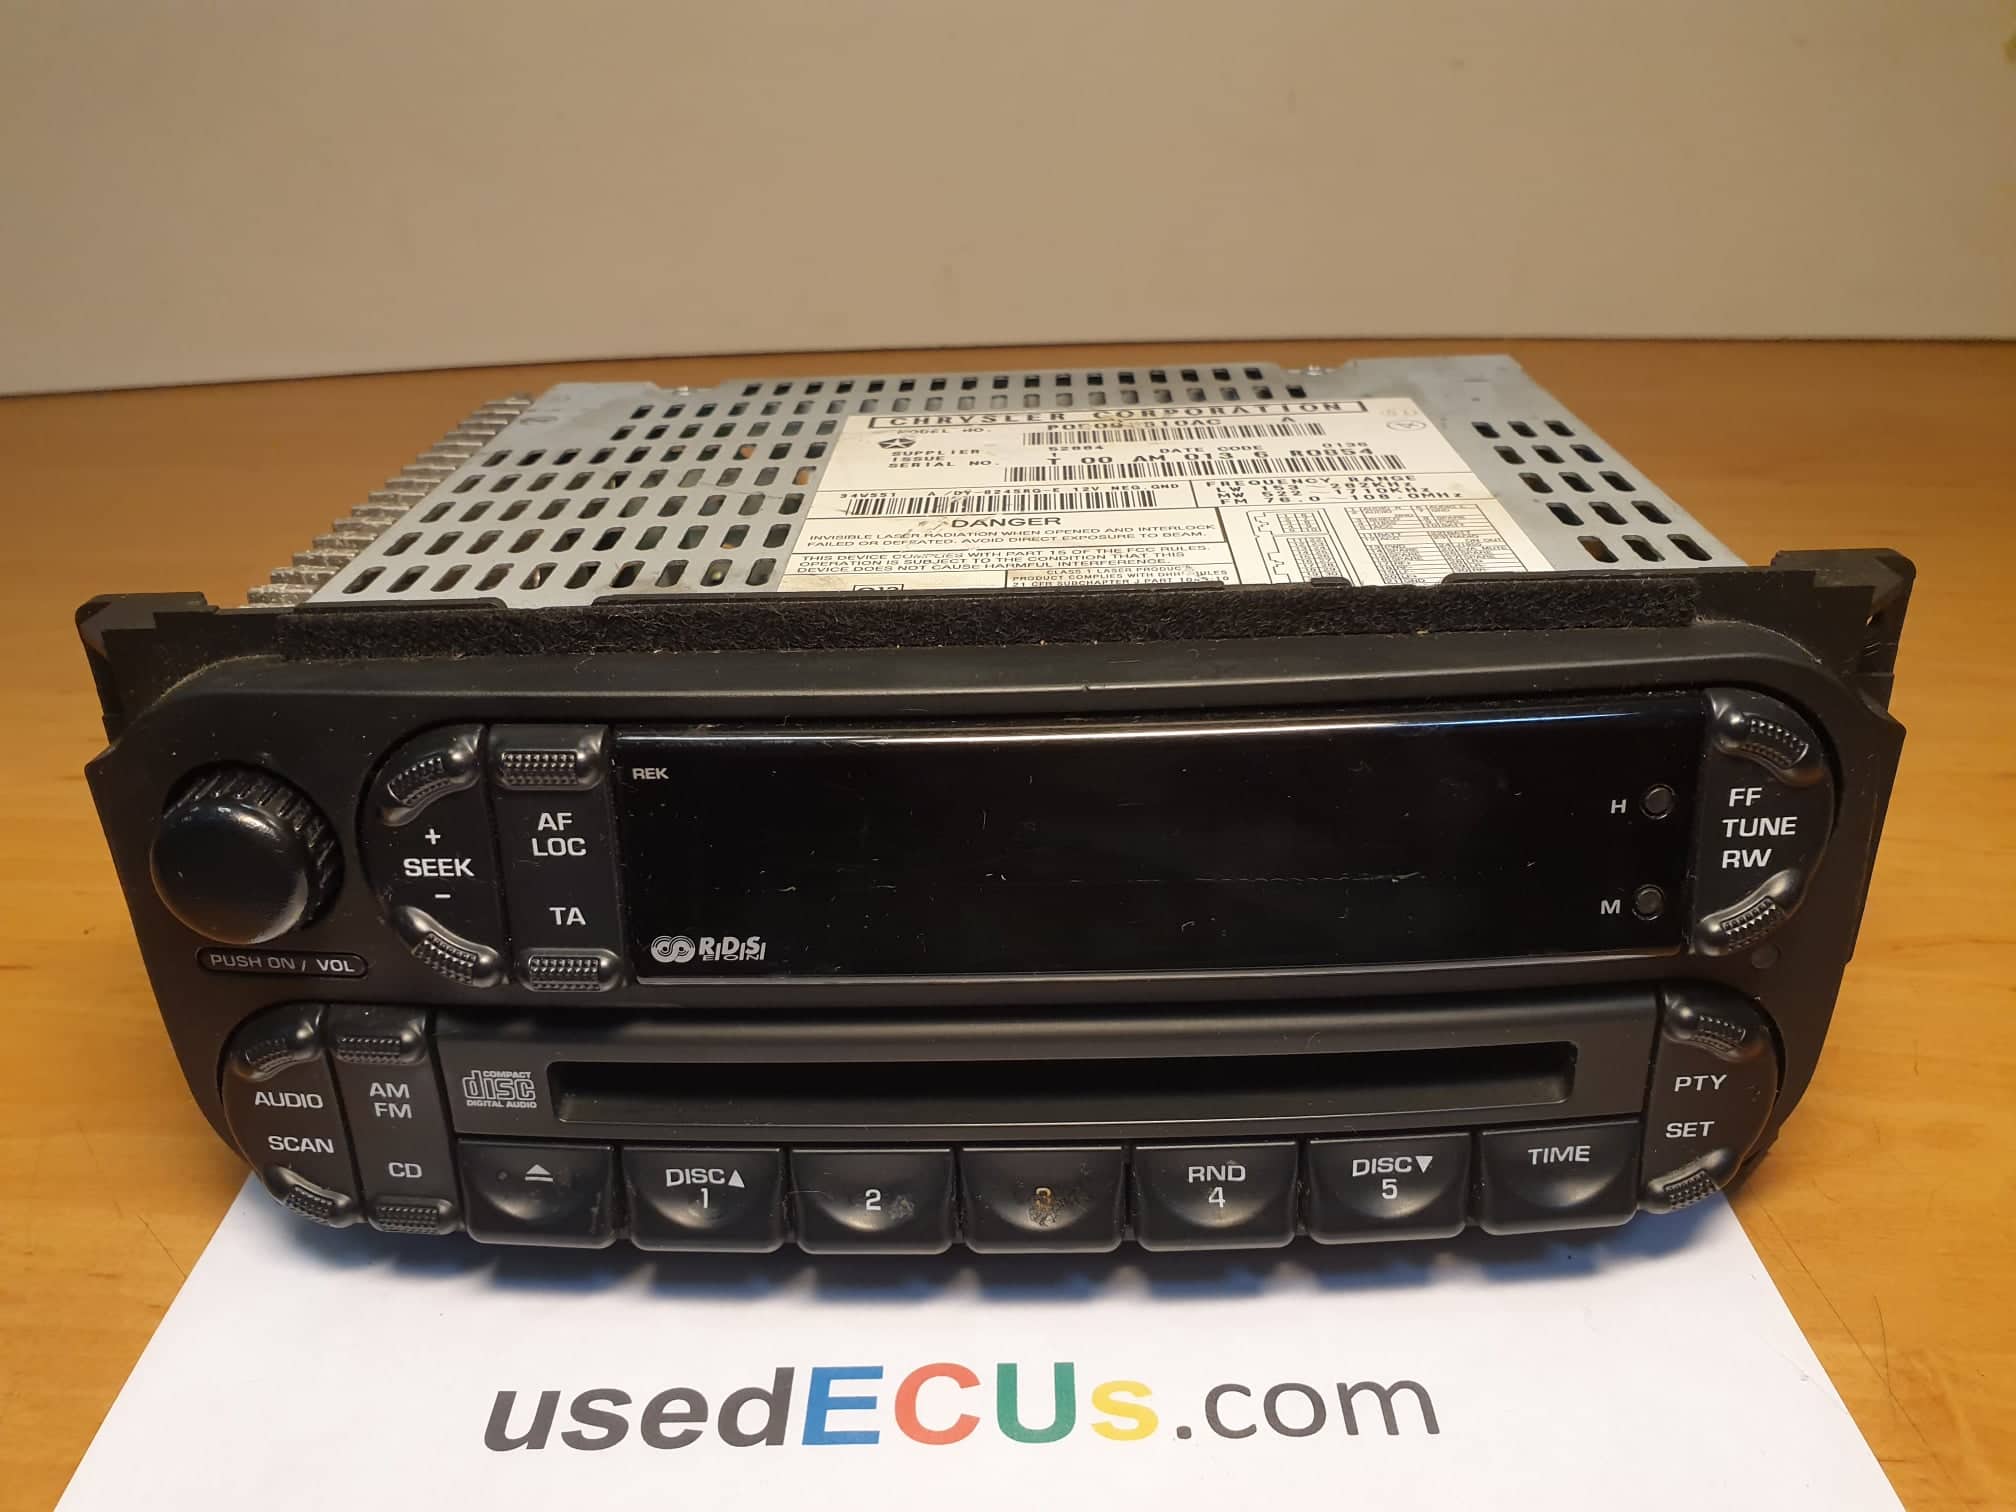 Voyager 2004-08 Player Stereo Head Unit - usedecus.com